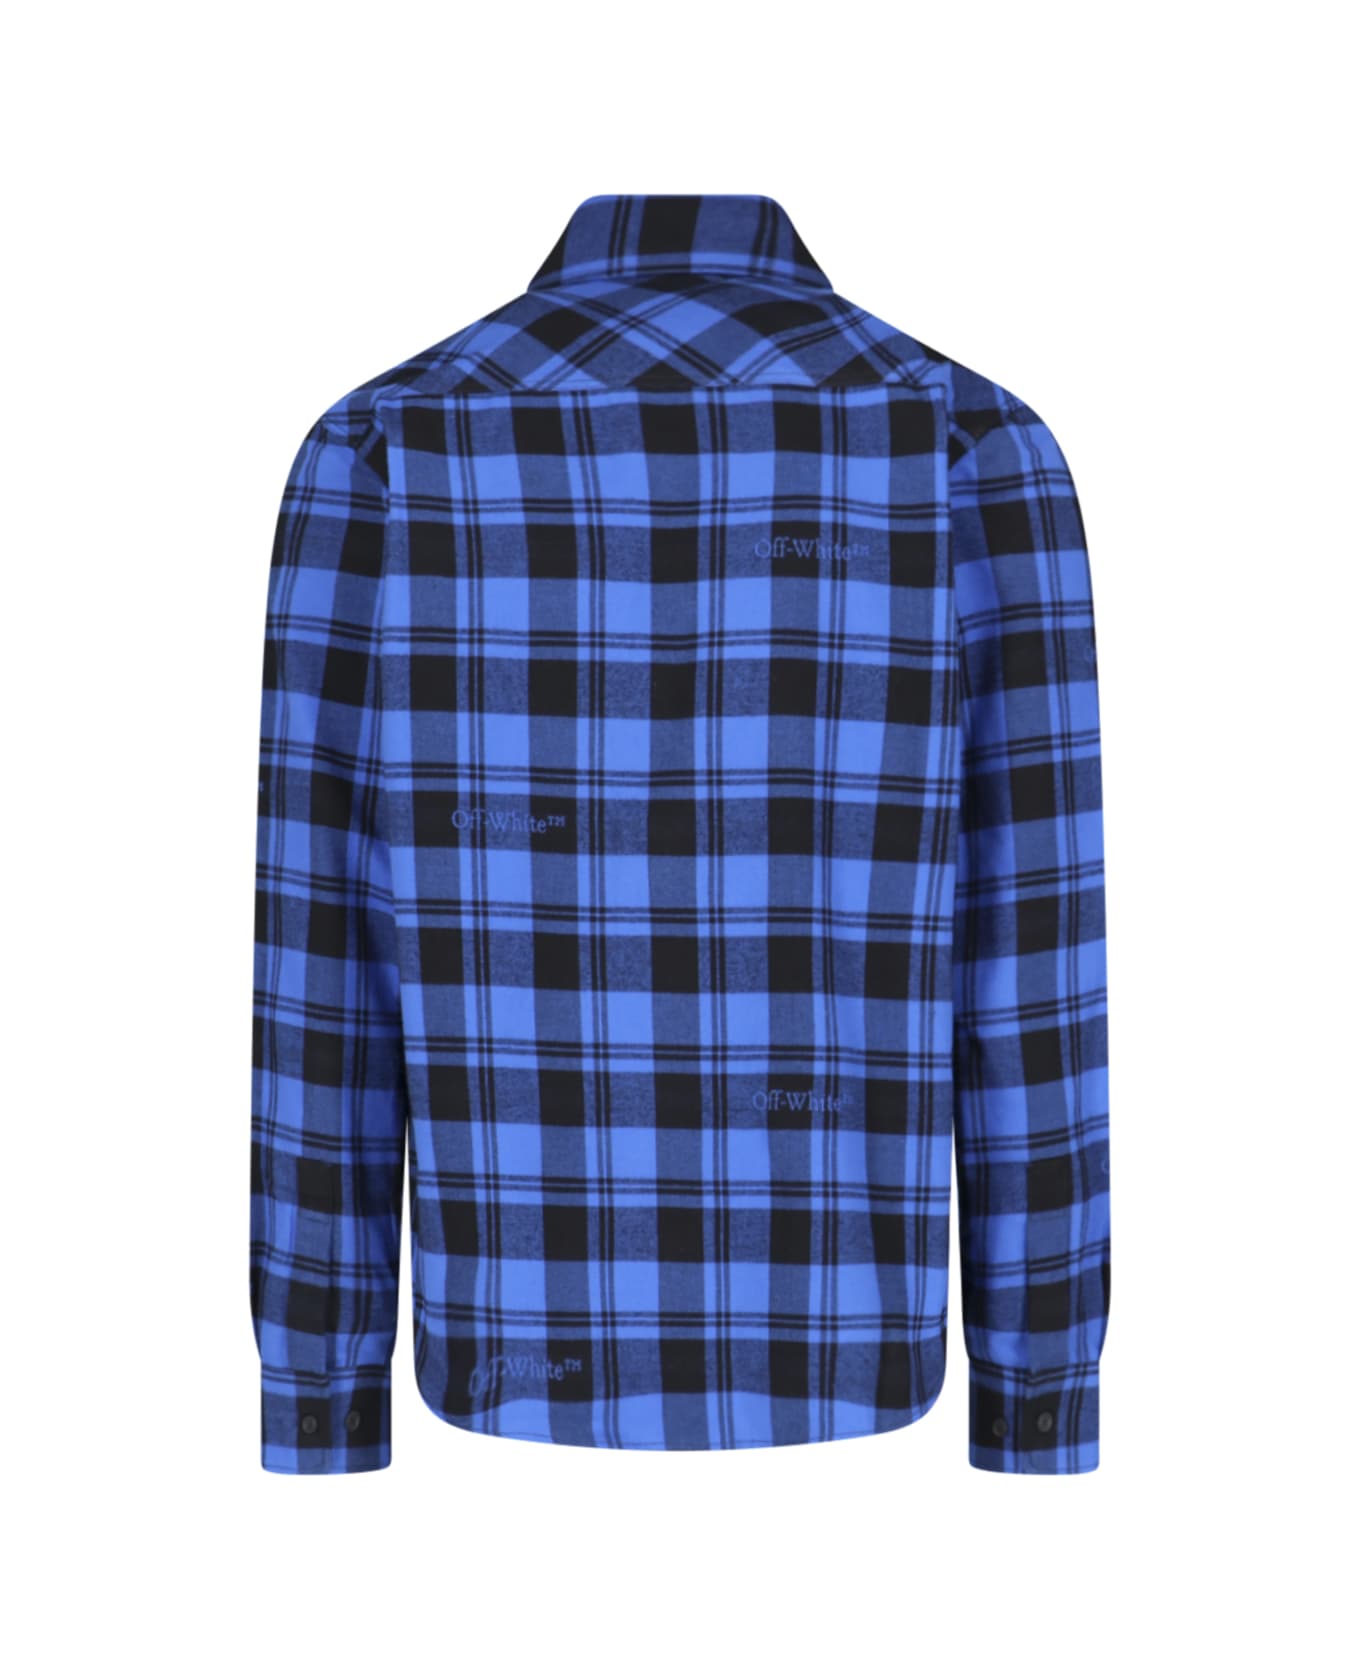 Off-White Checked Flannel Shirt - Blue シャツ